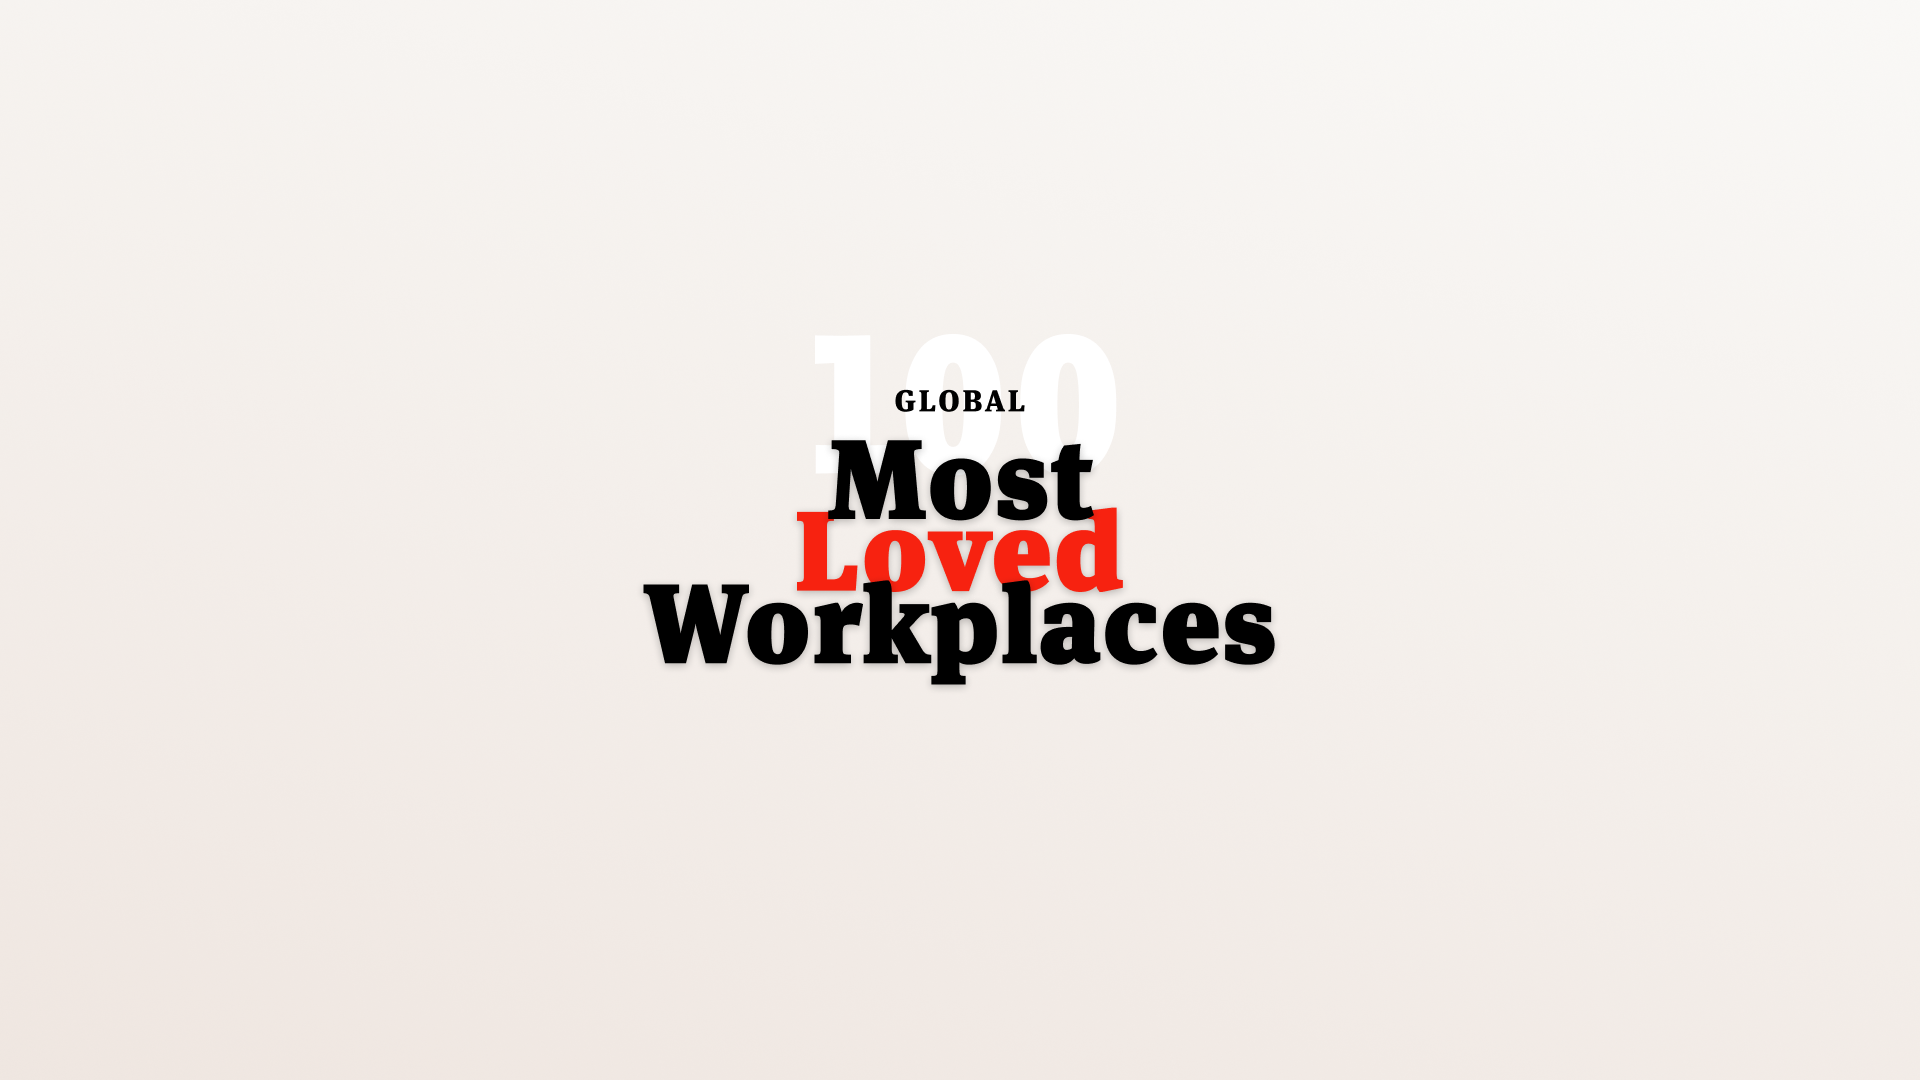 AKQA recognised as the 9th Most Loved Workplace in the World by Newsweek -  AKQA